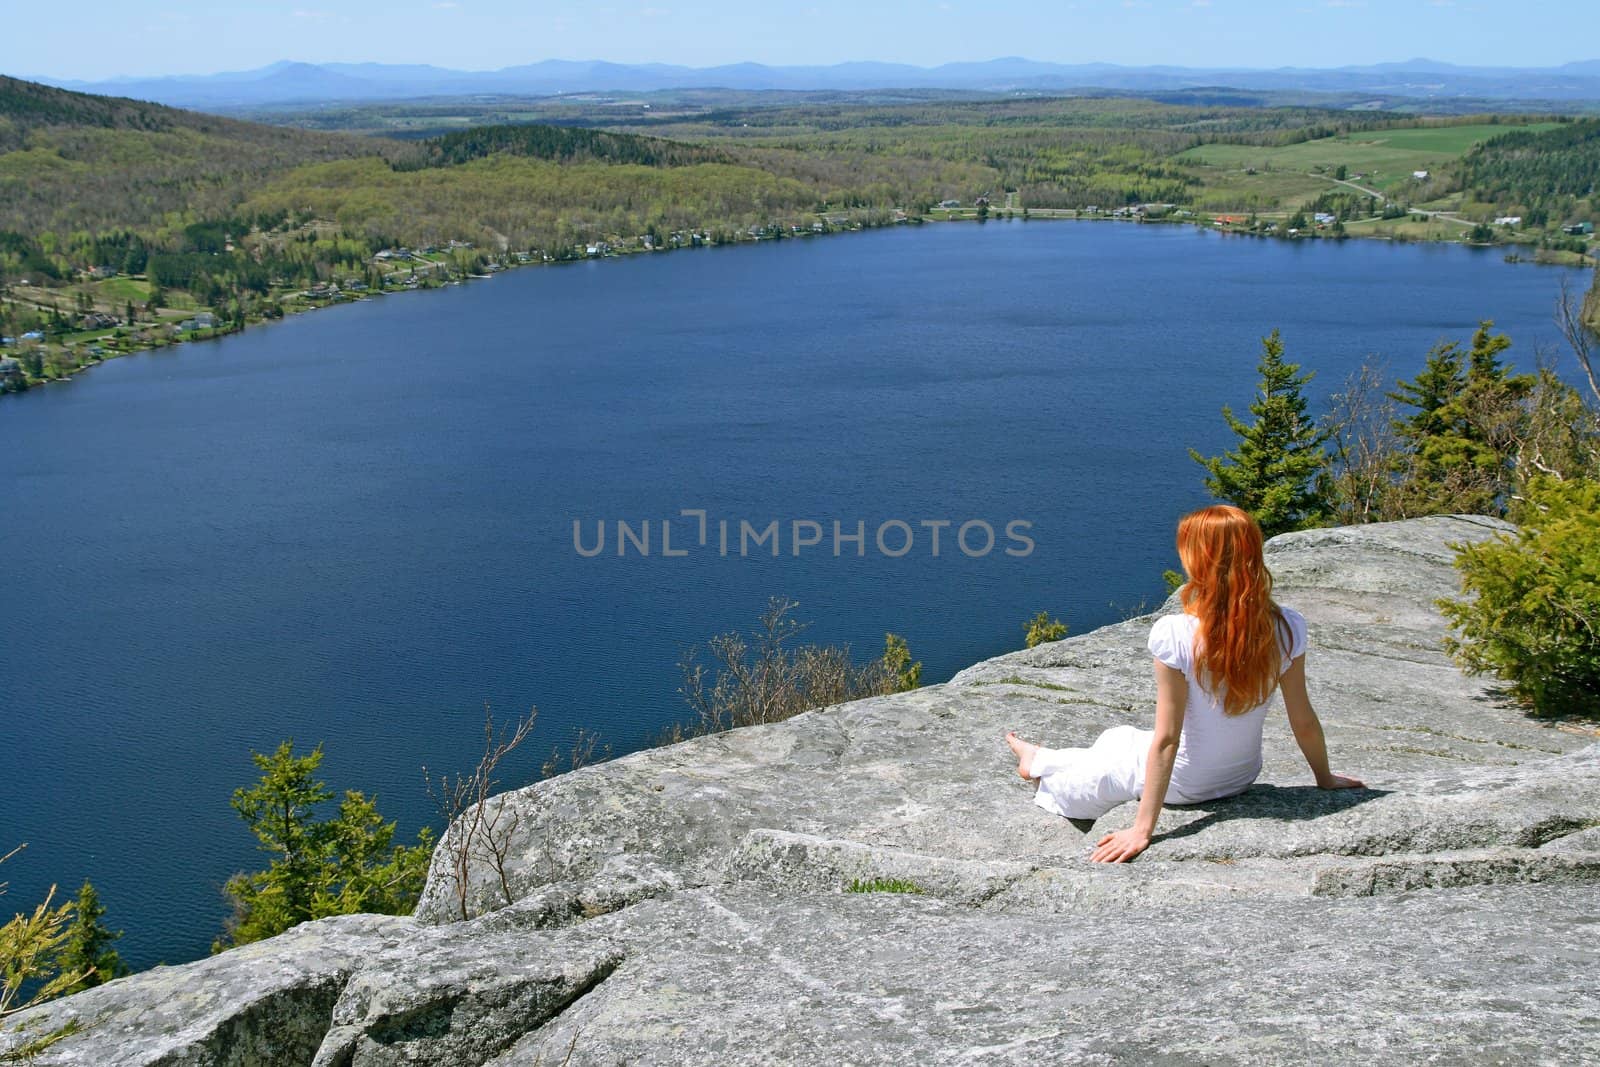 Young woman enjoying the view over lake from the mountain.